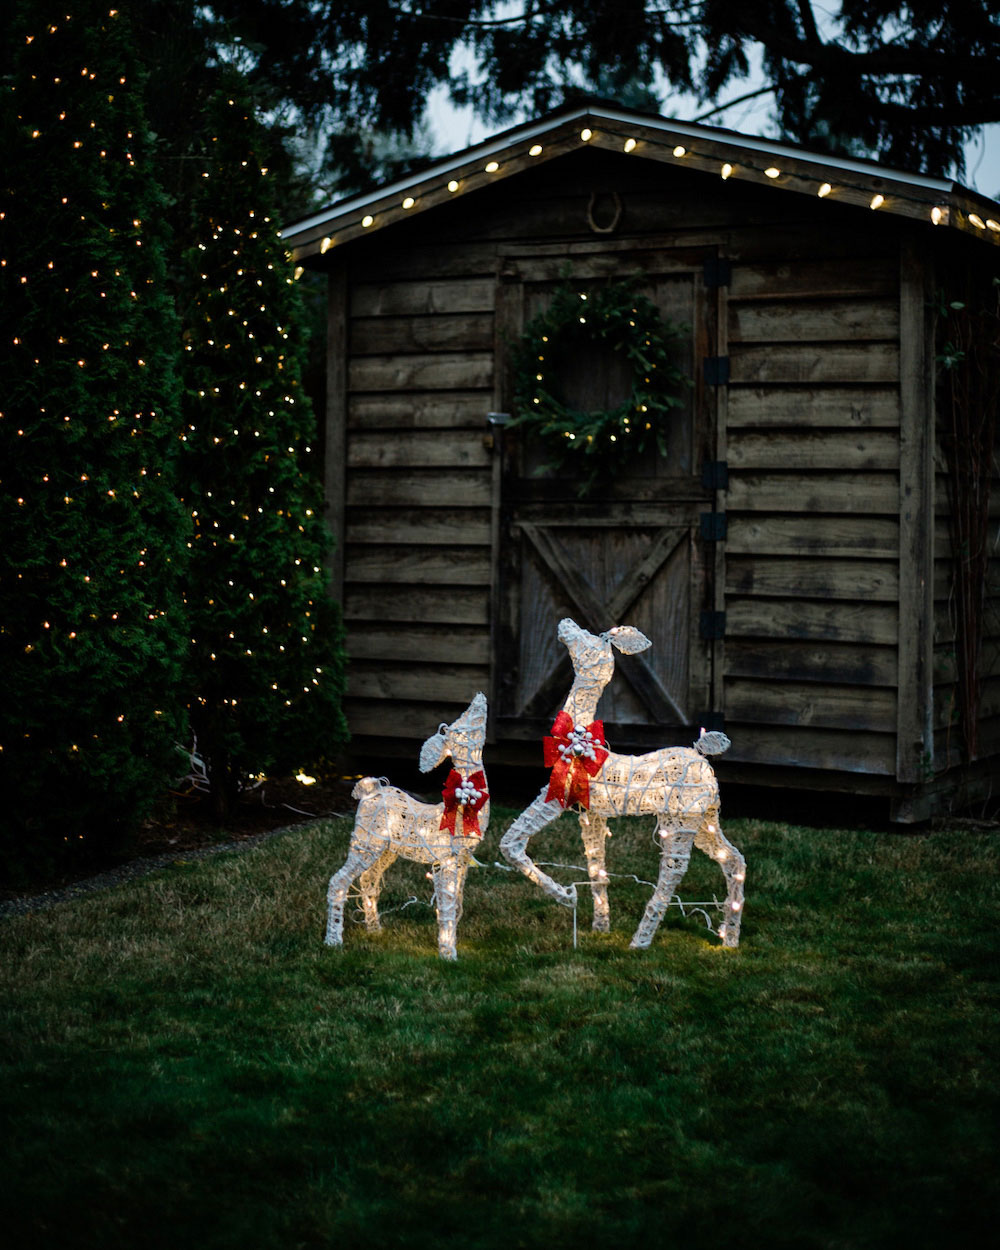 Outdoor shot of two holiday reindeer in the yard in front of a wooden shed